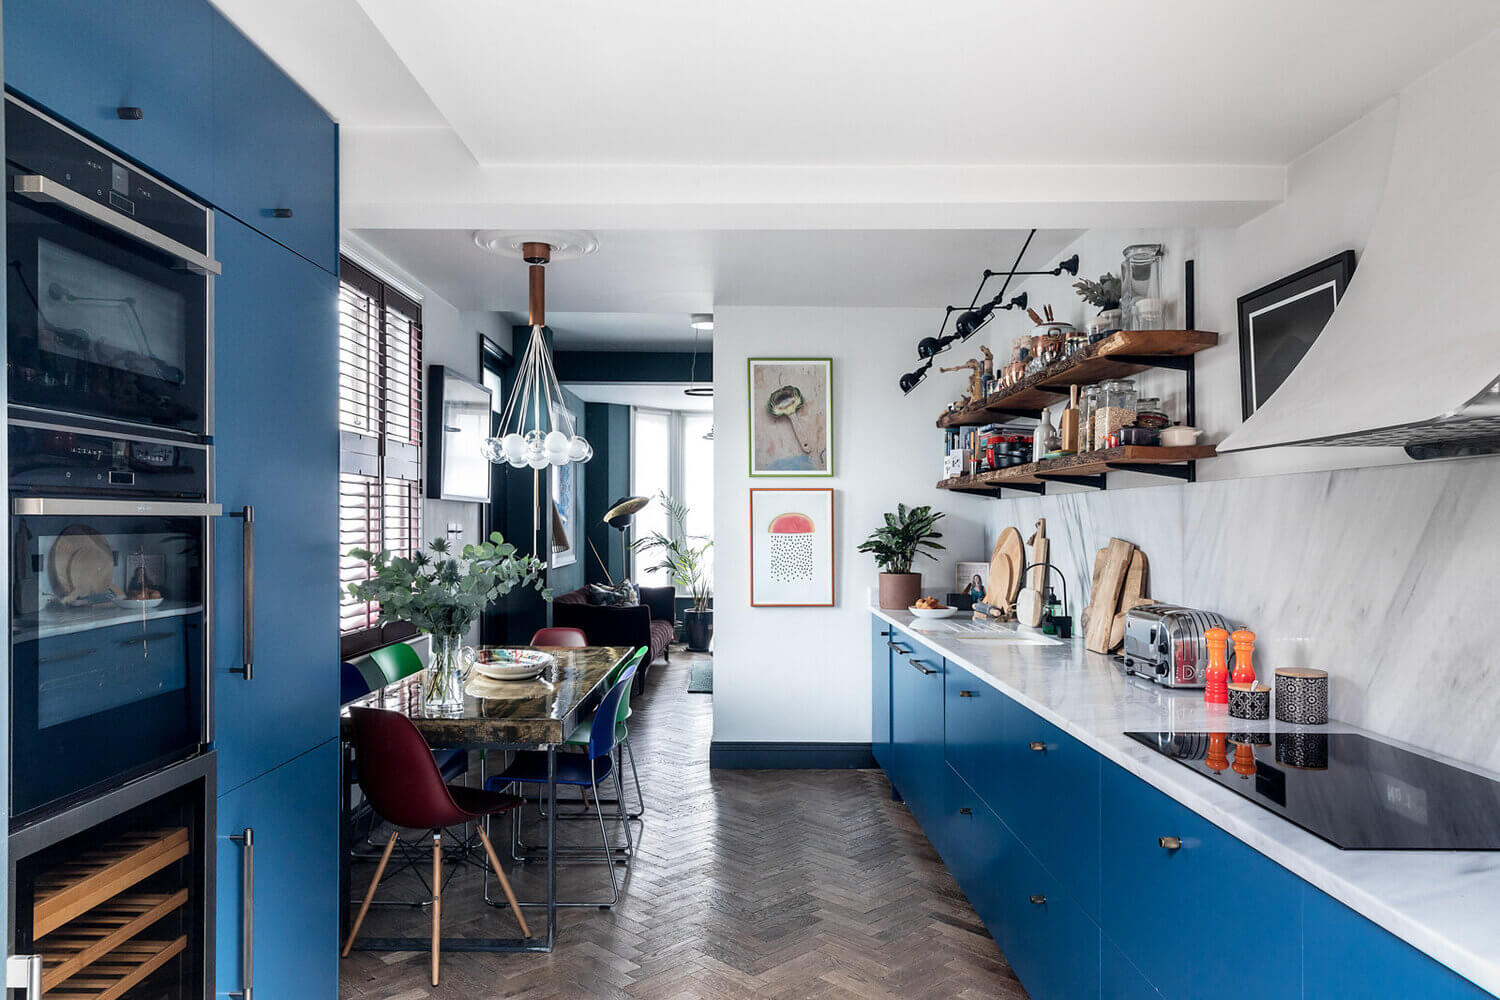 AnEclecticBlueHouseinLondon TheNordroom1 1 An Eclectic Narrow Blue House in London